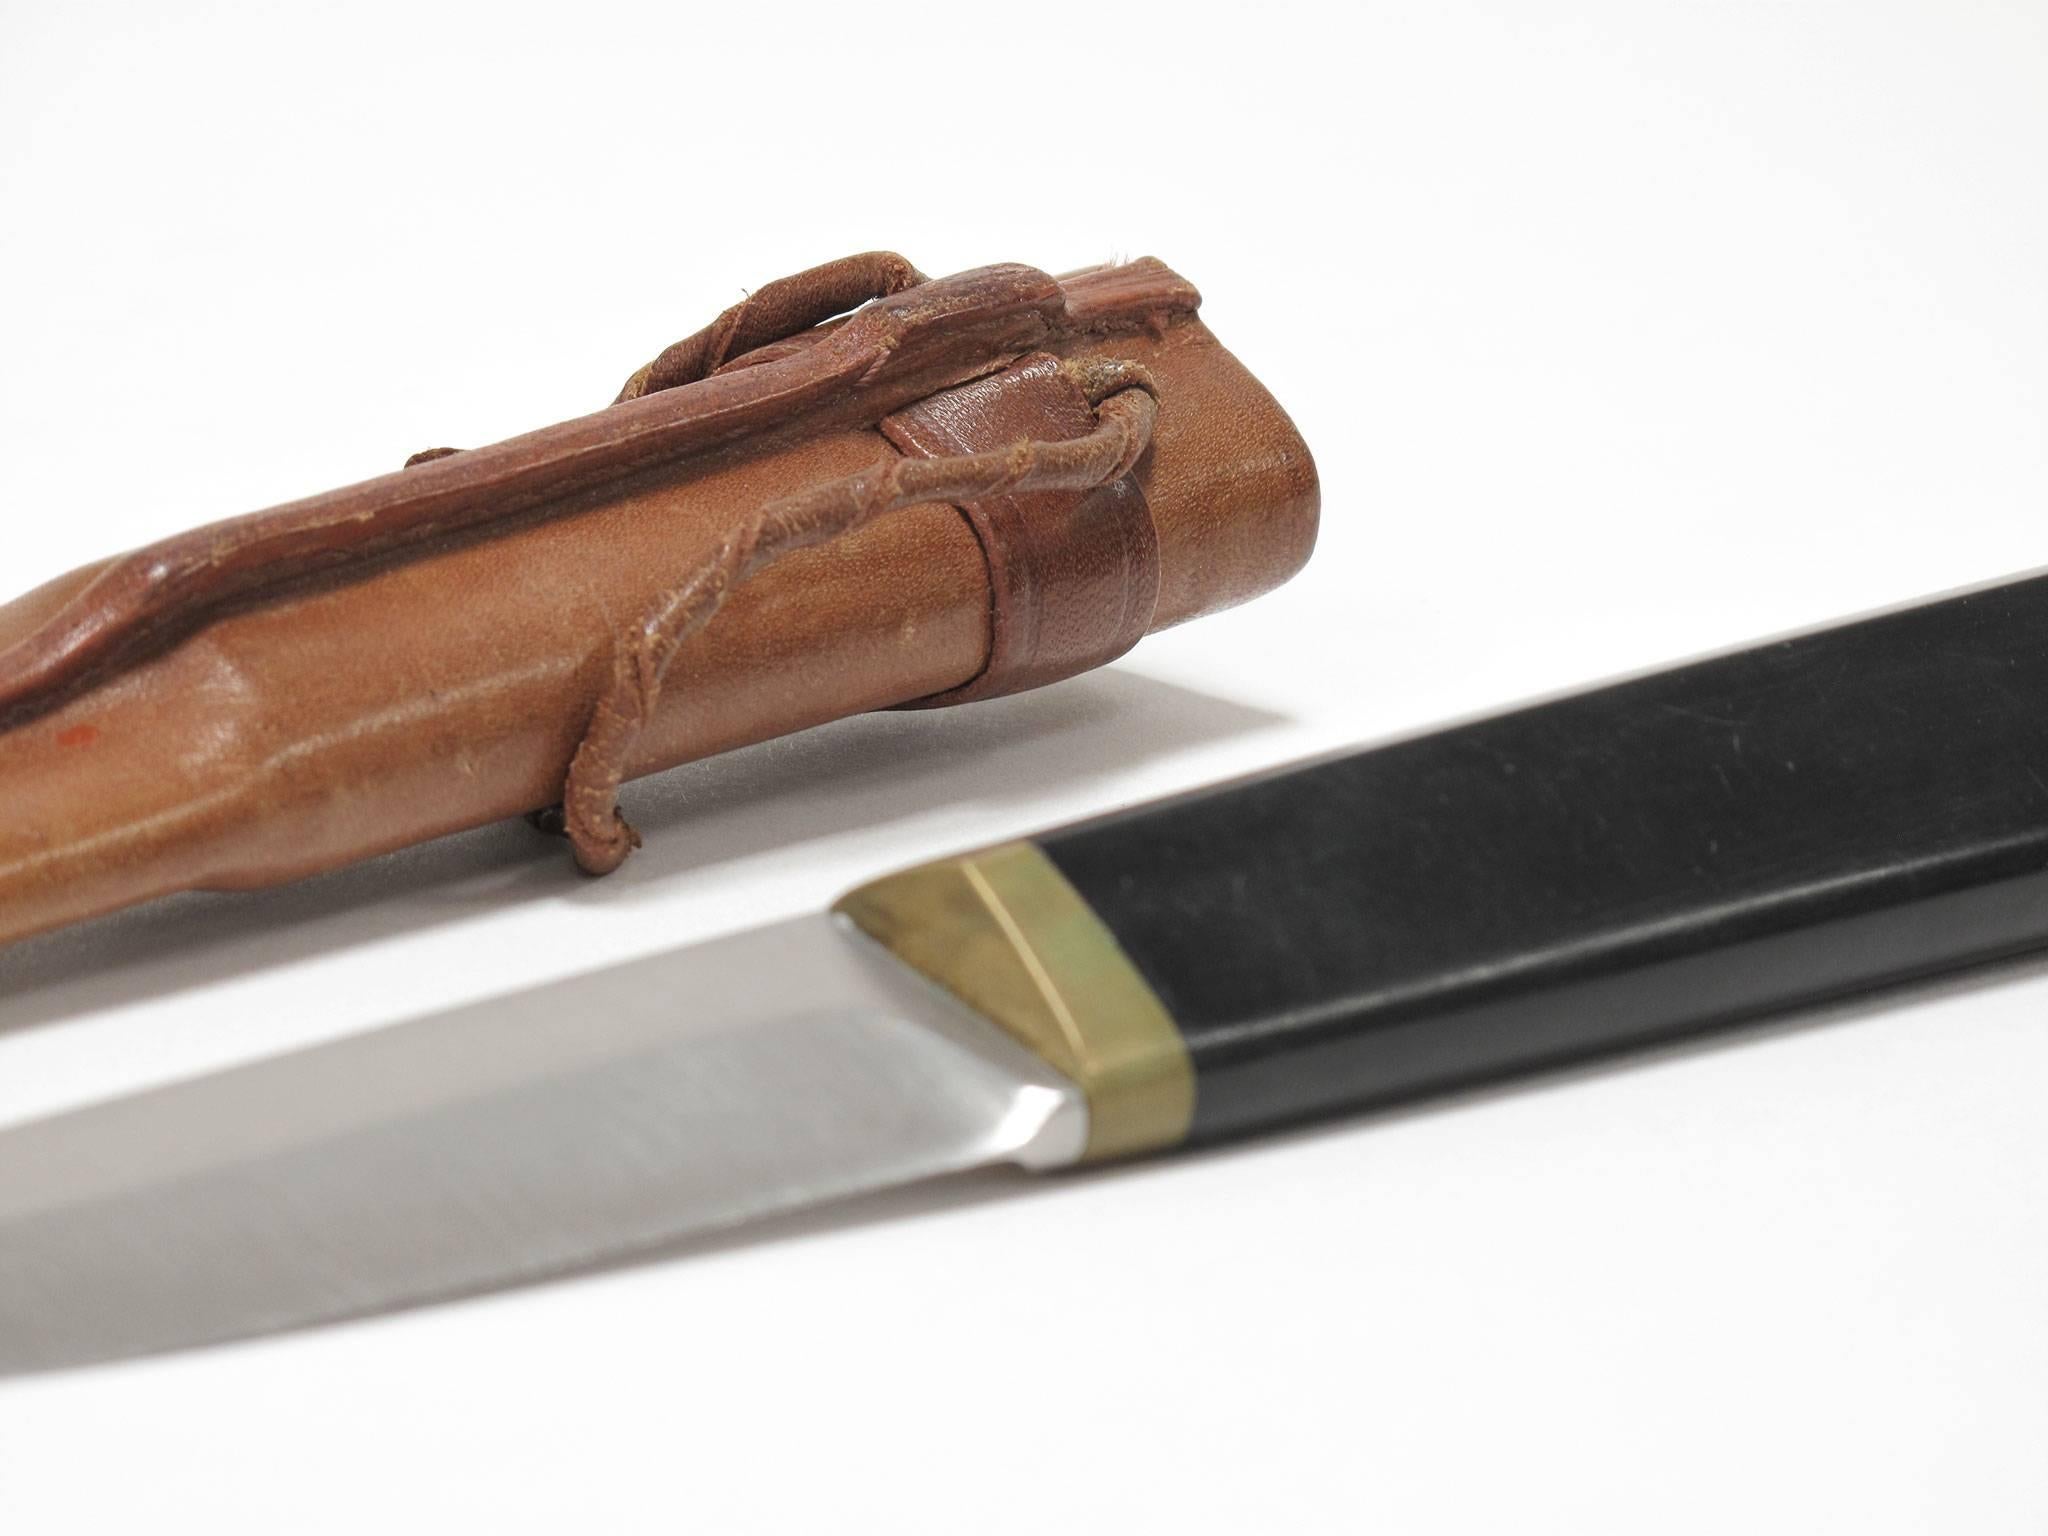 Tapio Wirkkala 'Puukko' Knife and Leather Sheath, 1960s In Excellent Condition For Sale In Los Angeles, CA